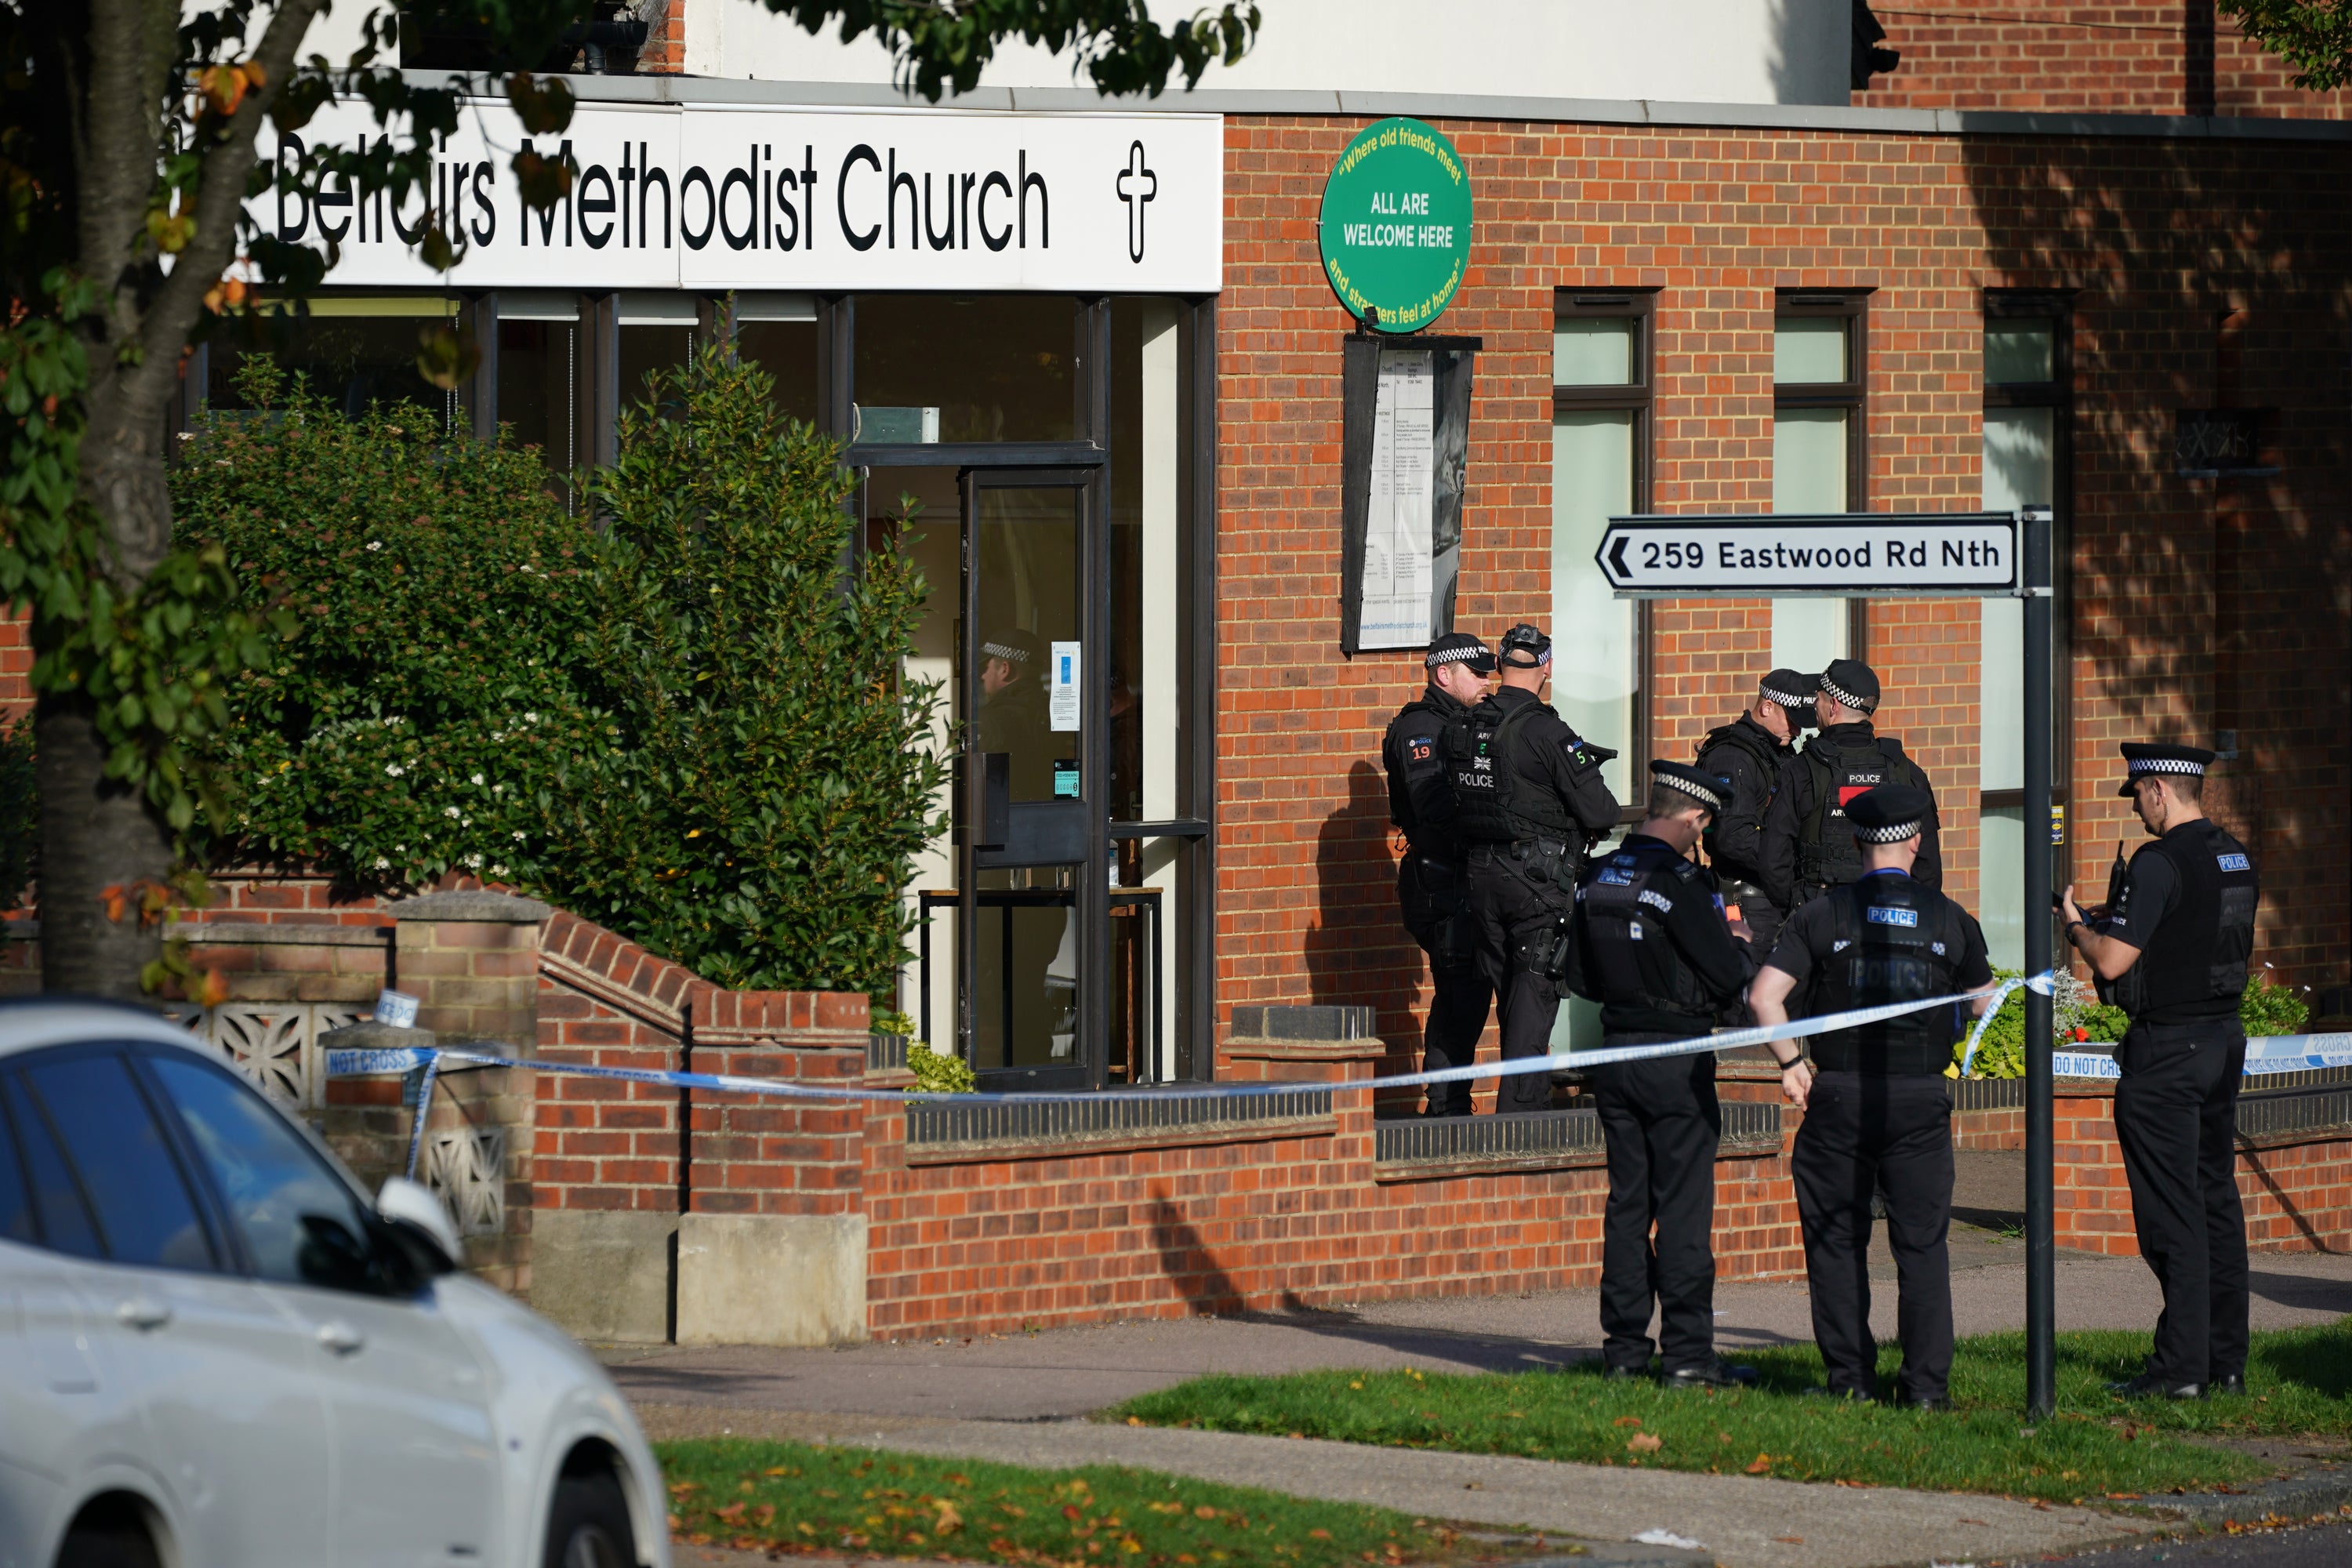 Emergency services at the scene at the Belfairs Methodist Church (Yui Mok/PA)